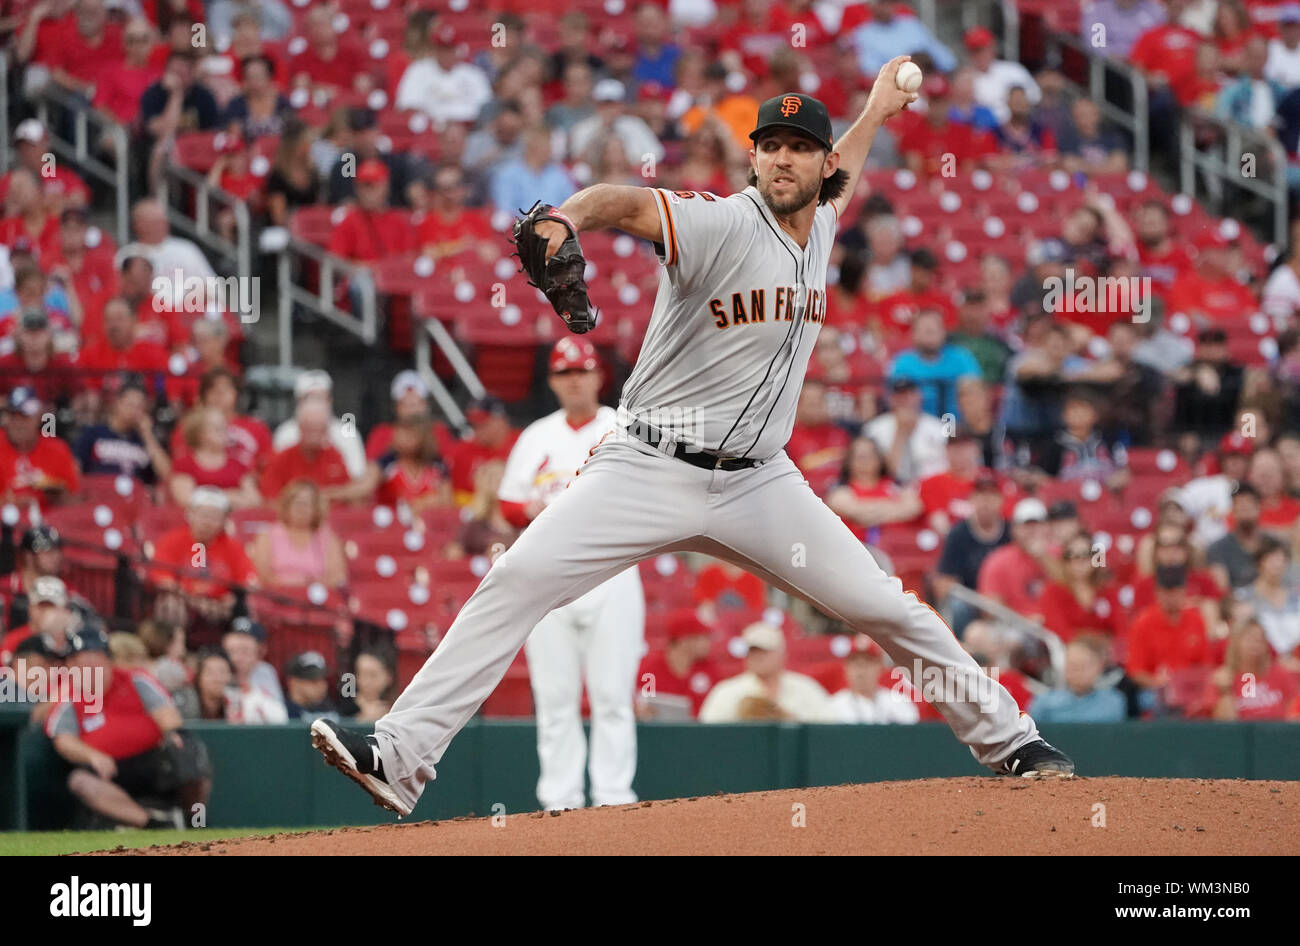 St. Louis, United States. 04th Sep, 2019. San Francisco Giants starting pitcher Madison Bumgarner delivers a pitch to the St. Louis Cardinals in the first inning at Busch Stadium in St. Louis on Wednesday, September 4, 2019. Photo by Bill Greenblatt/UPI Credit: UPI/Alamy Live News Stock Photo